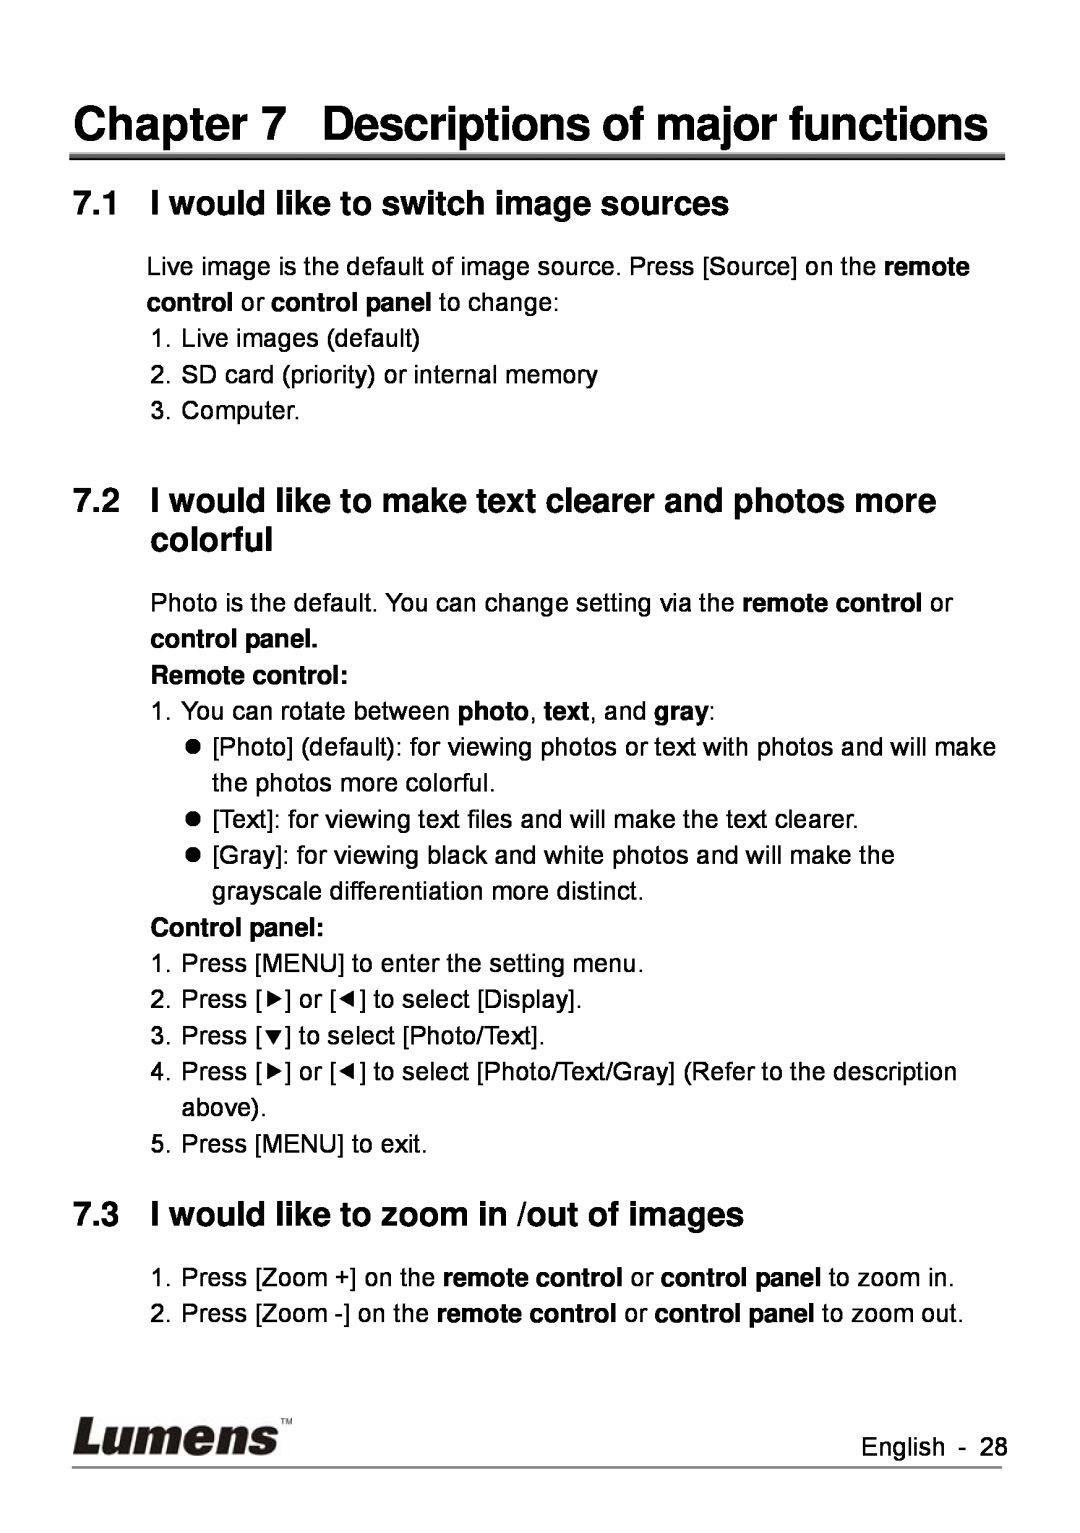 Lumens Technology DC260 user manual Descriptions of major functions, I would like to switch image sources, Remote control 